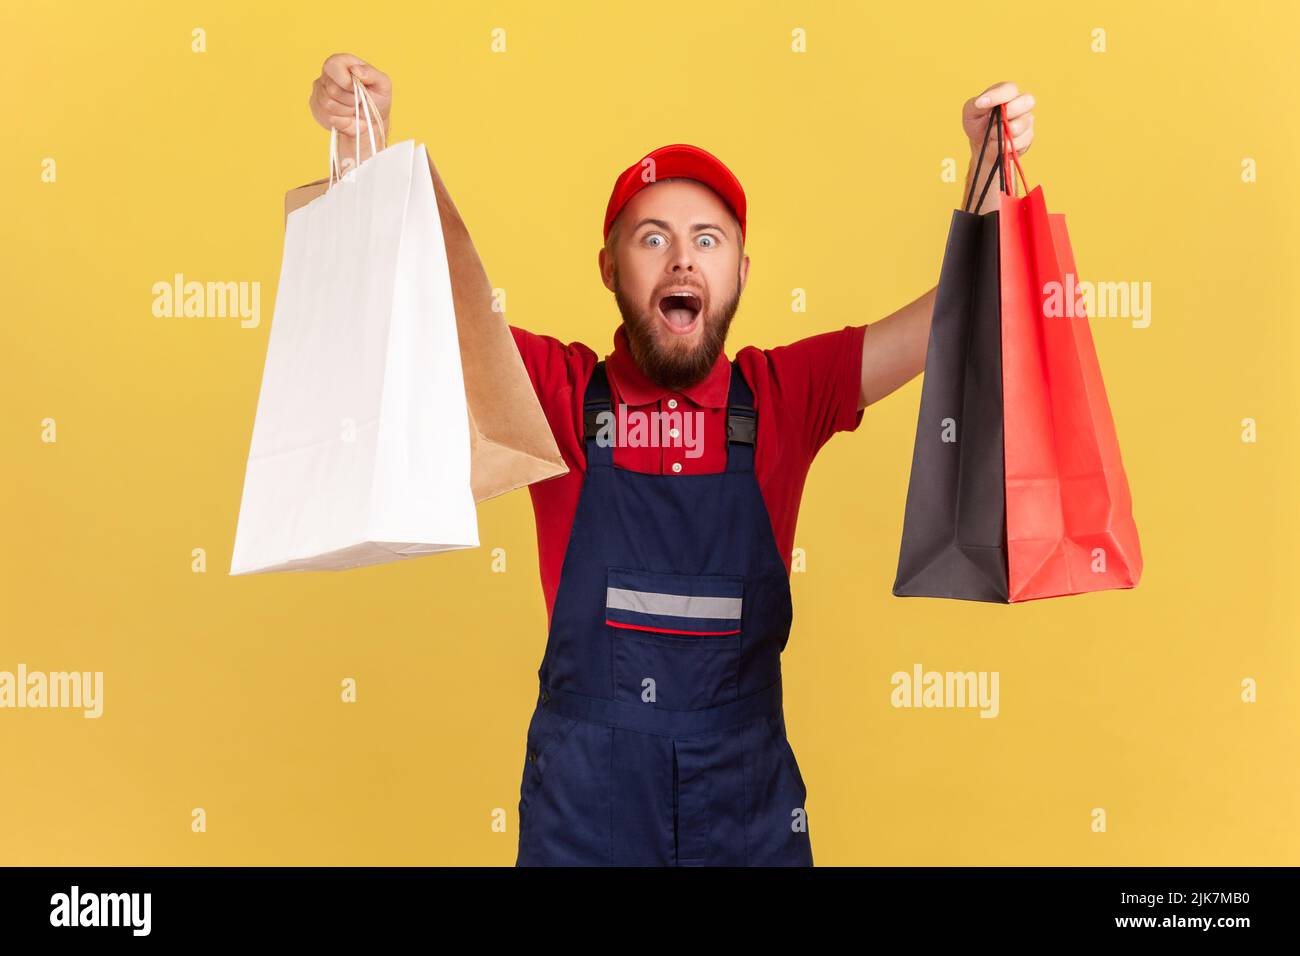 Portrait of amazed bearded courier man in blue uniform raised arms with shopping bags, big sale, bringing order, looking at camera with big eyes. Indoor studio shot isolated on yellow background. Stock Photo